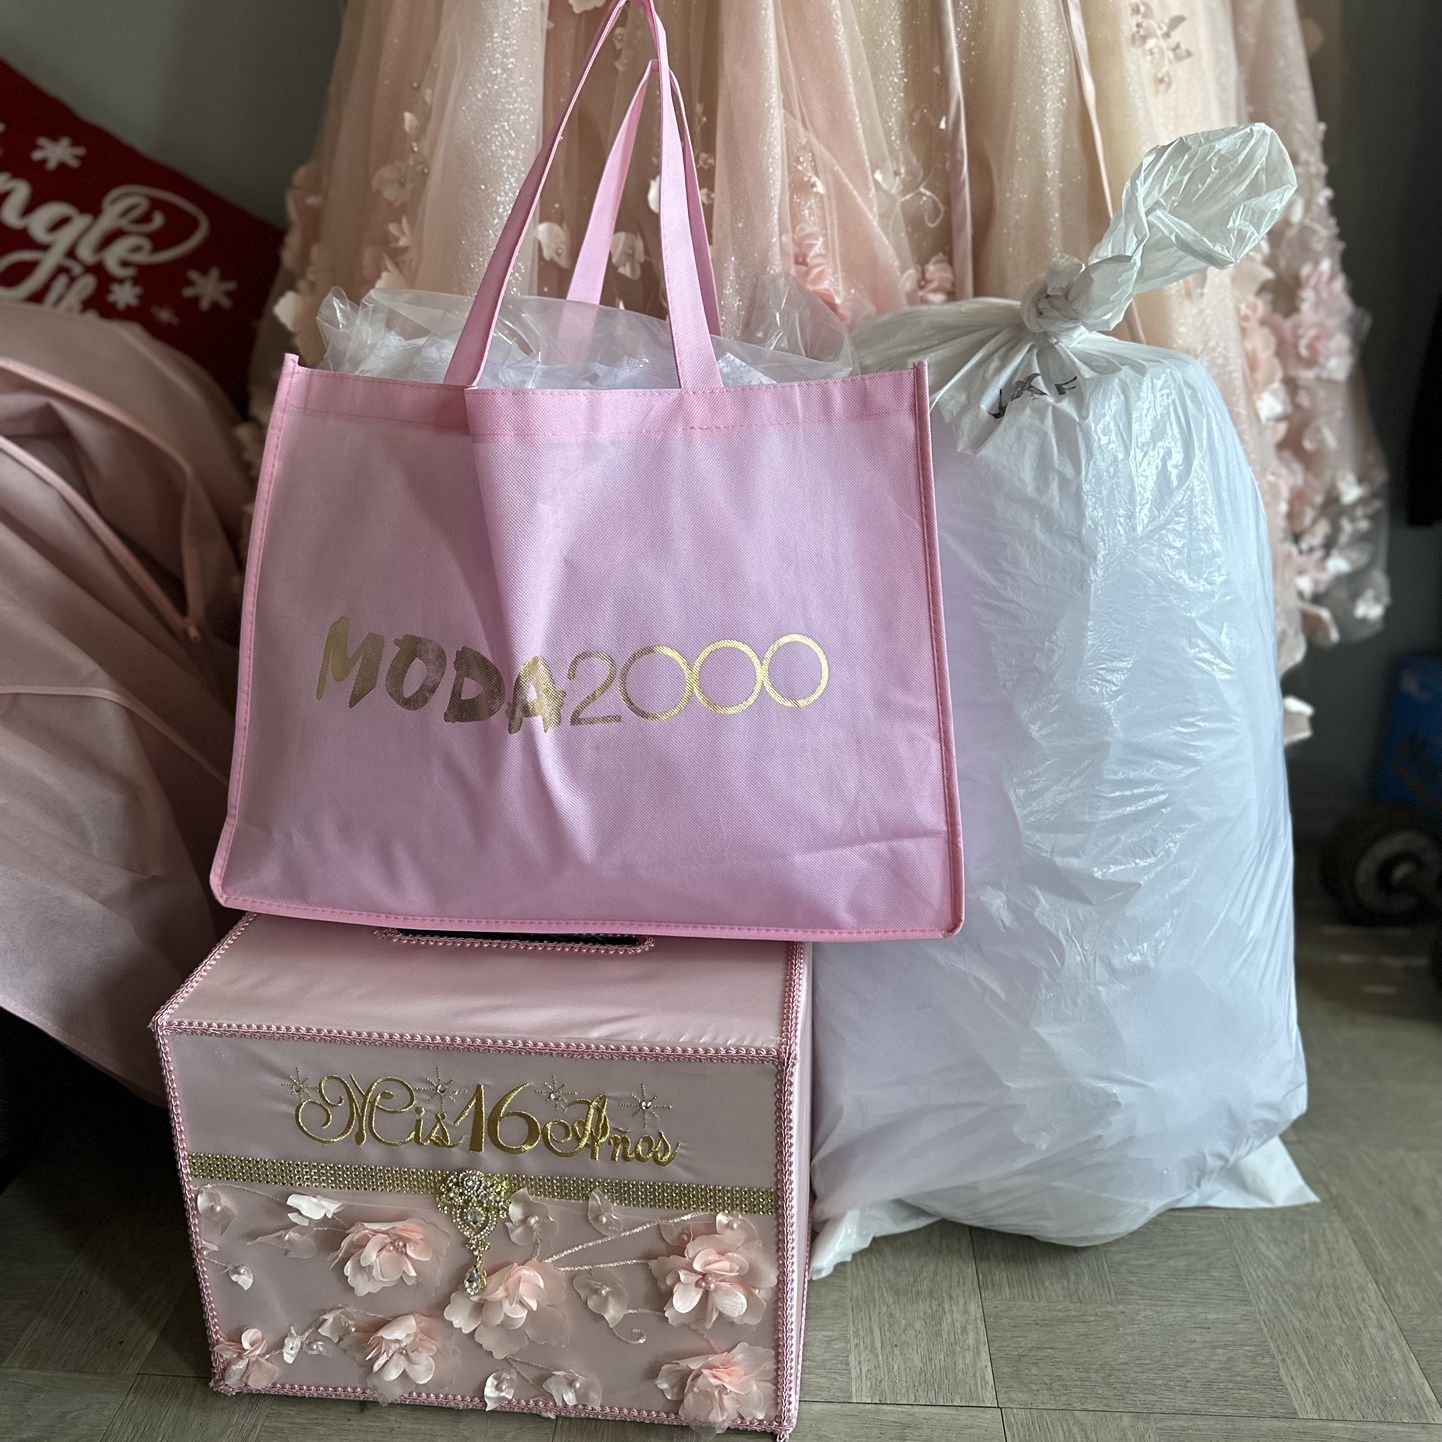 Beautiful Pink Michael Kors Bag for Sale in Los Angeles, CA - OfferUp